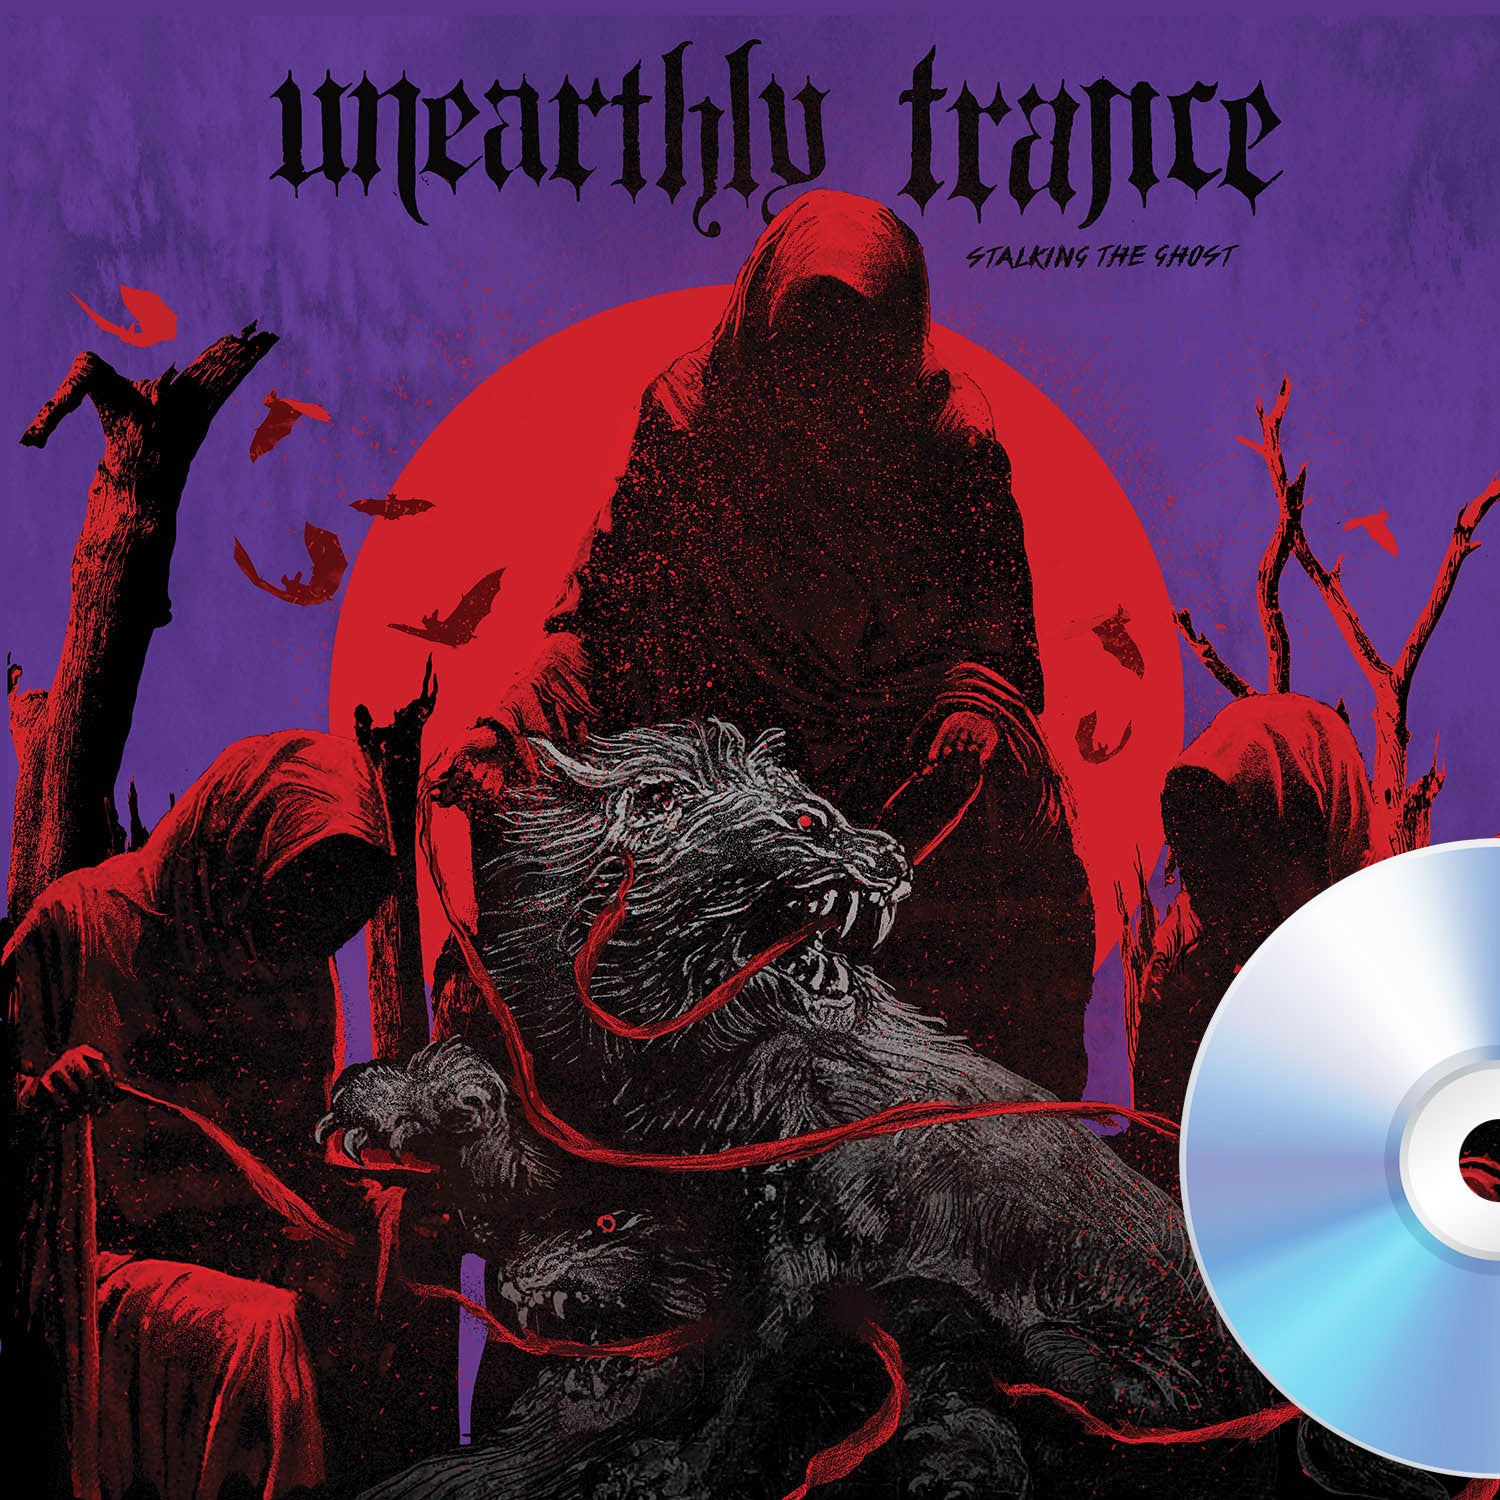 Unearthly Trance "Stalking The Ghost" CD